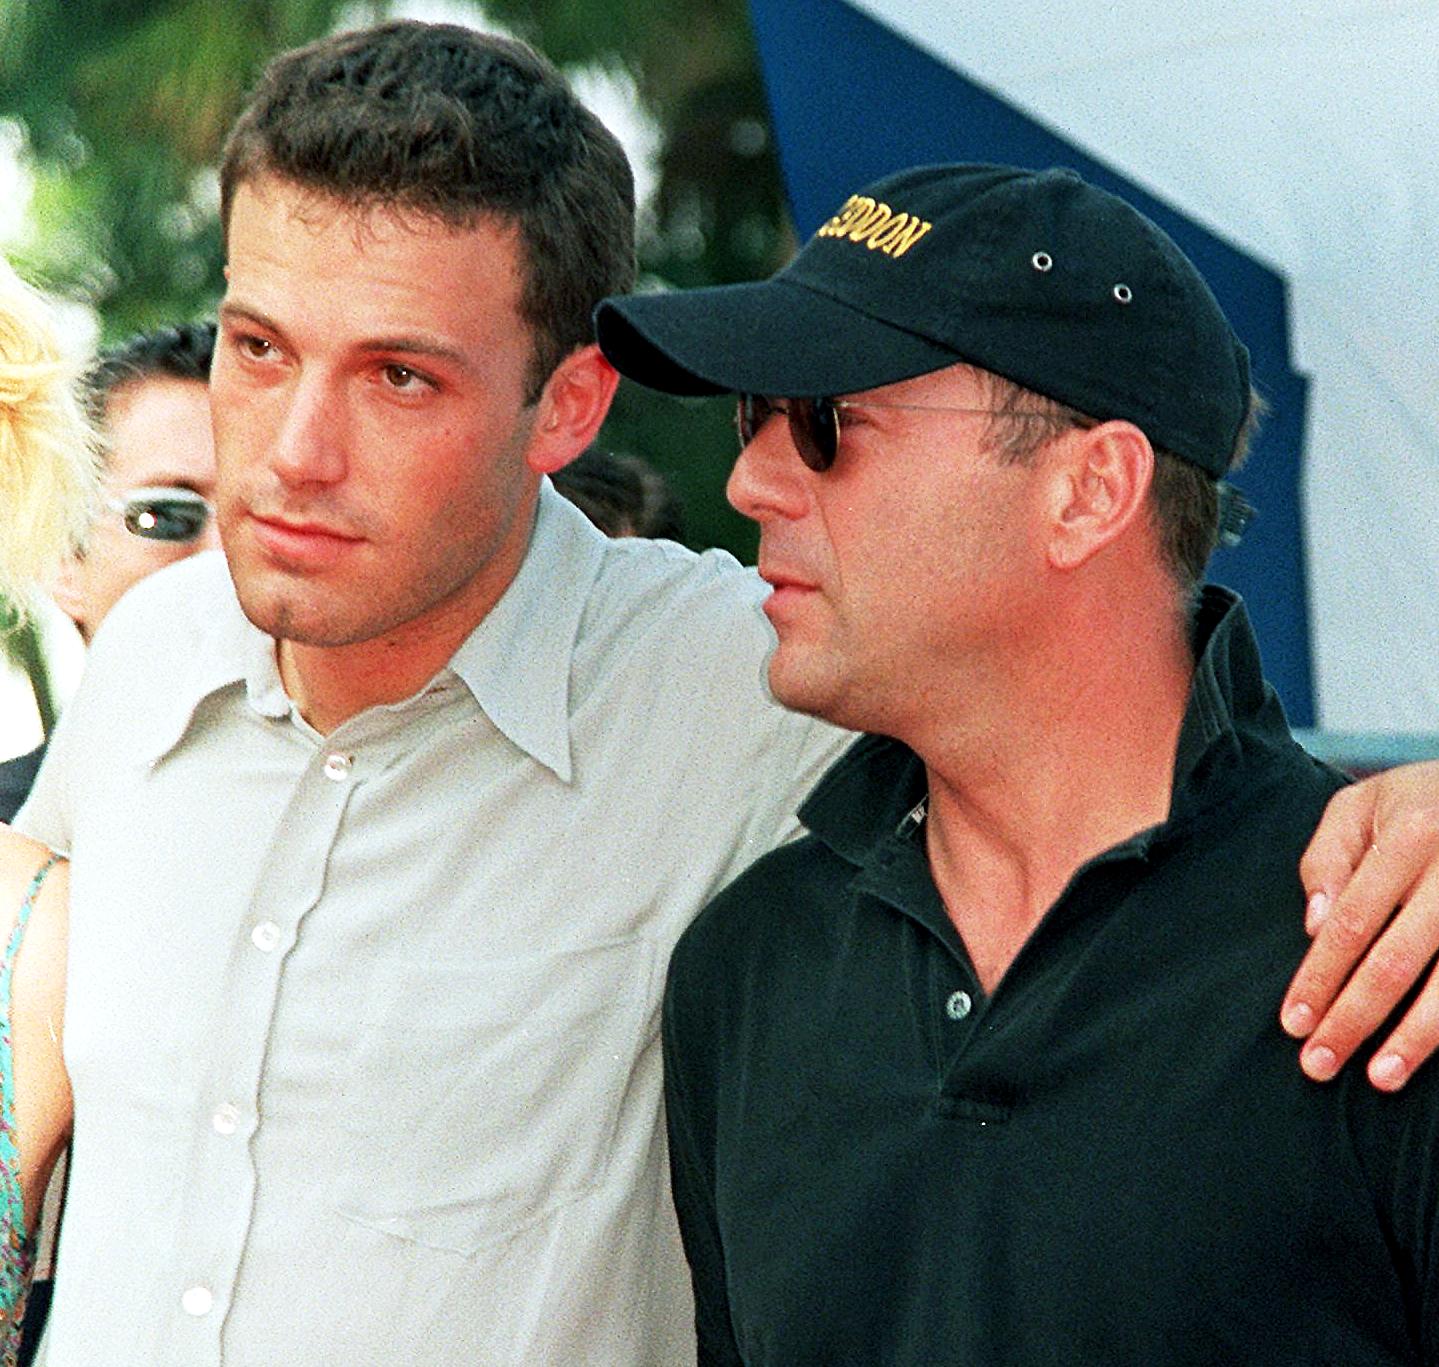 Bruce Willis and Ben Affleck at the "Armageddon" premiere at Kennedy Space Center's Saturn 5 center in Florida on June 29, 1998 | Source: Getty Images